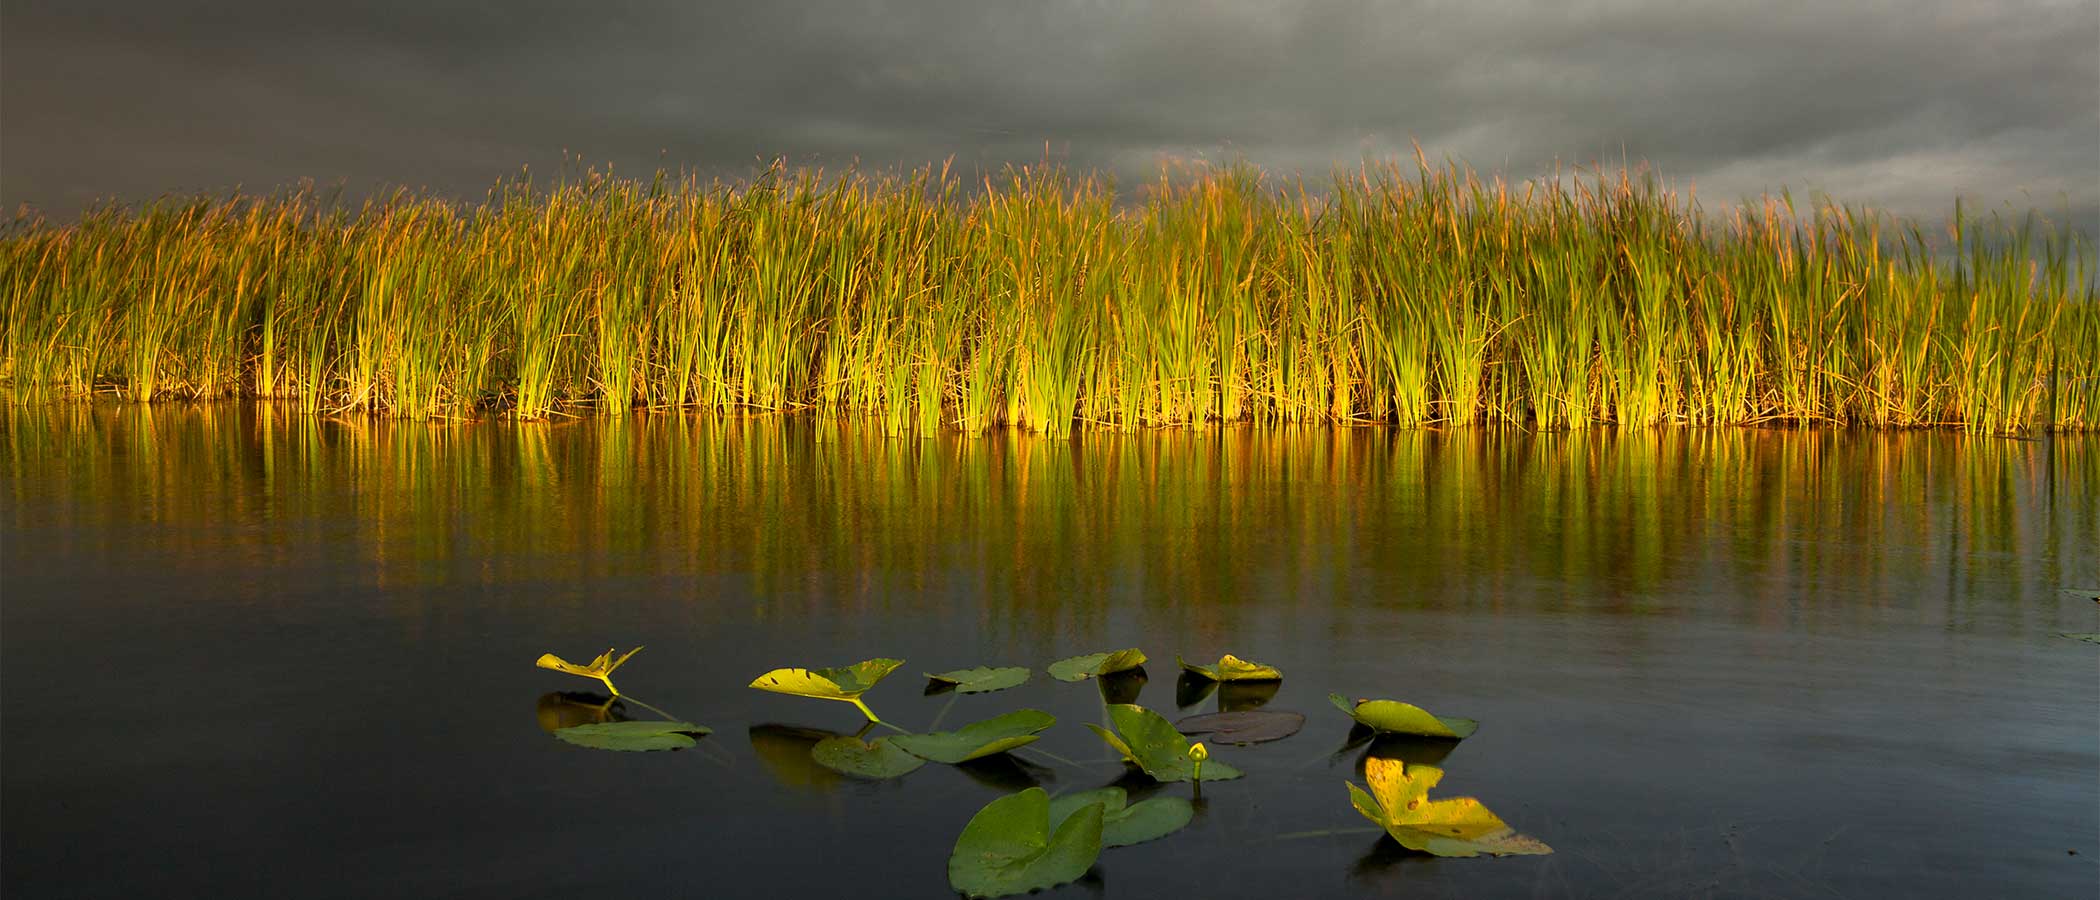 Sawgrasses and lilies in the Everglades.